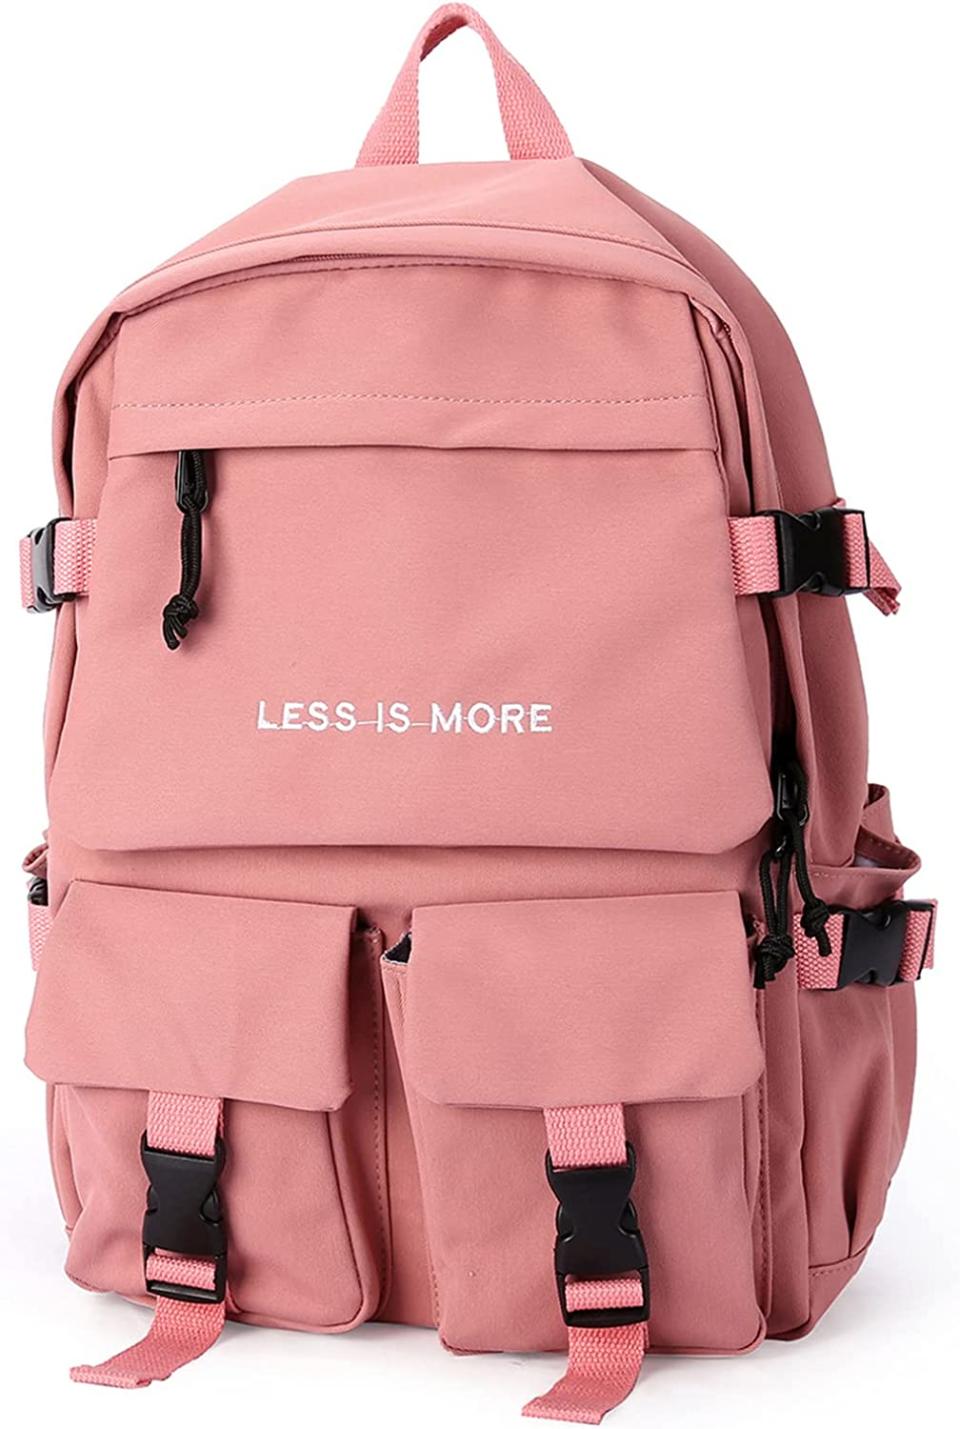 pink backpack with two front pockets